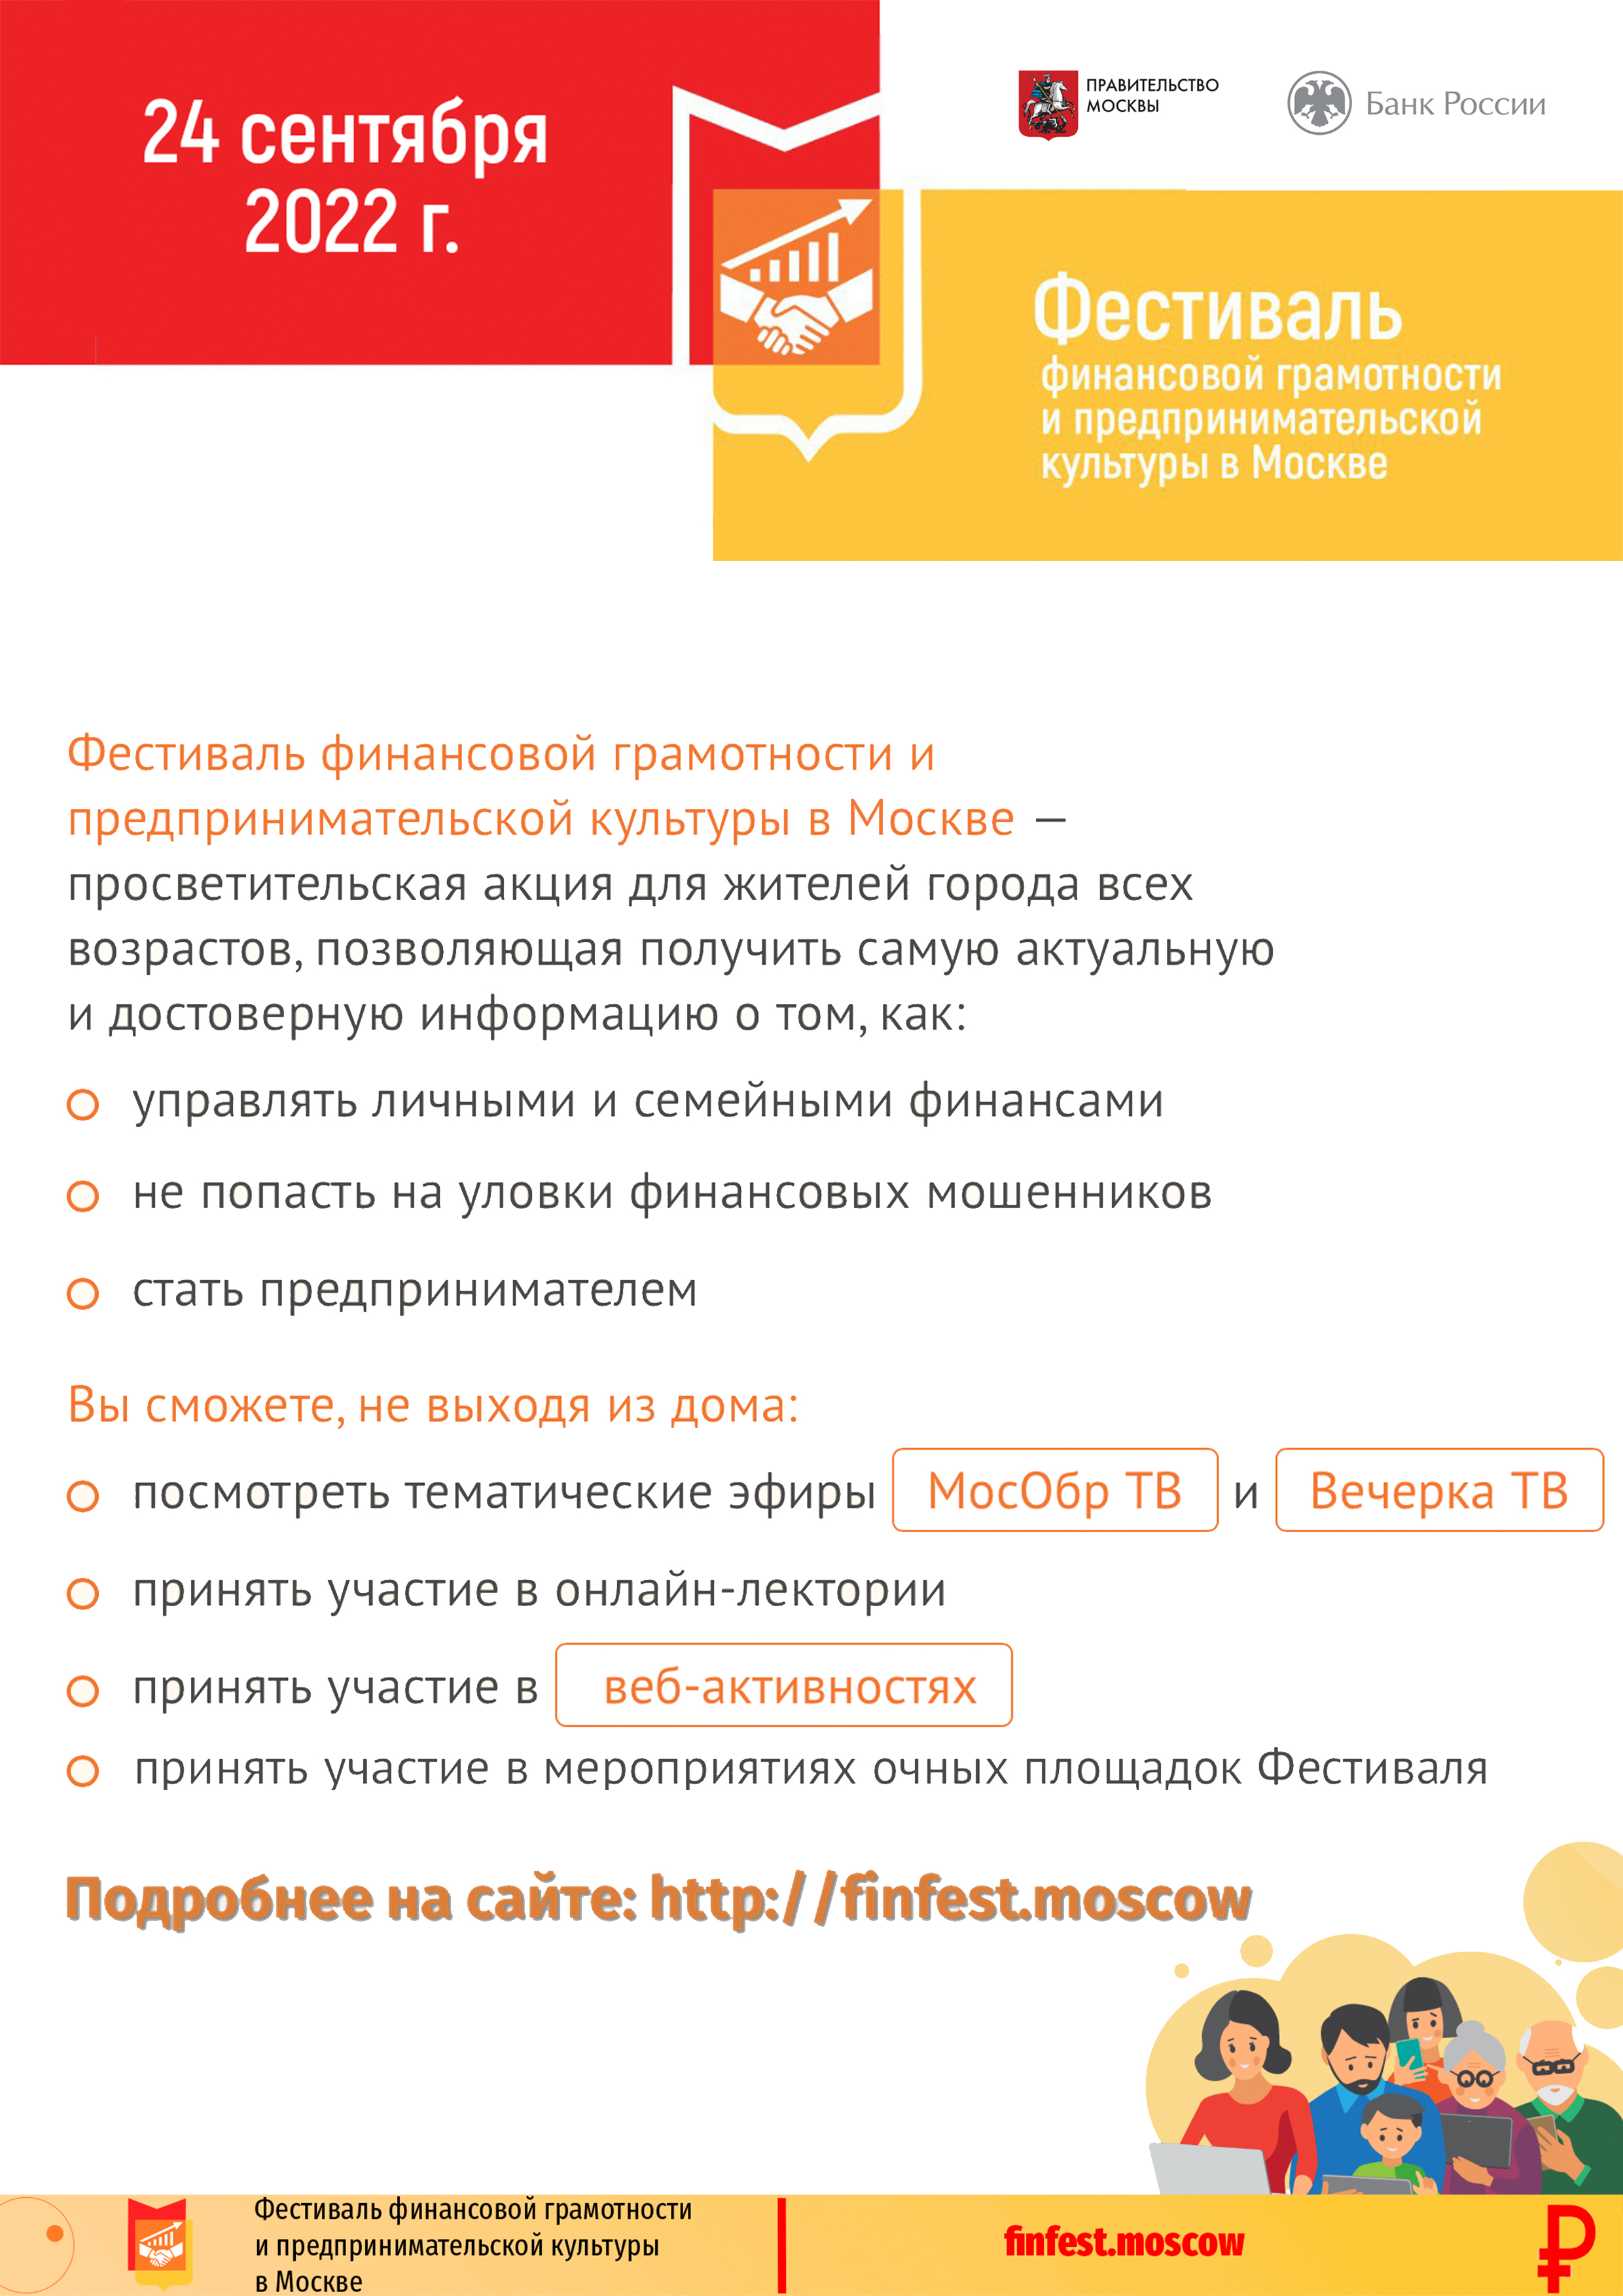 https://finfest.moscow/